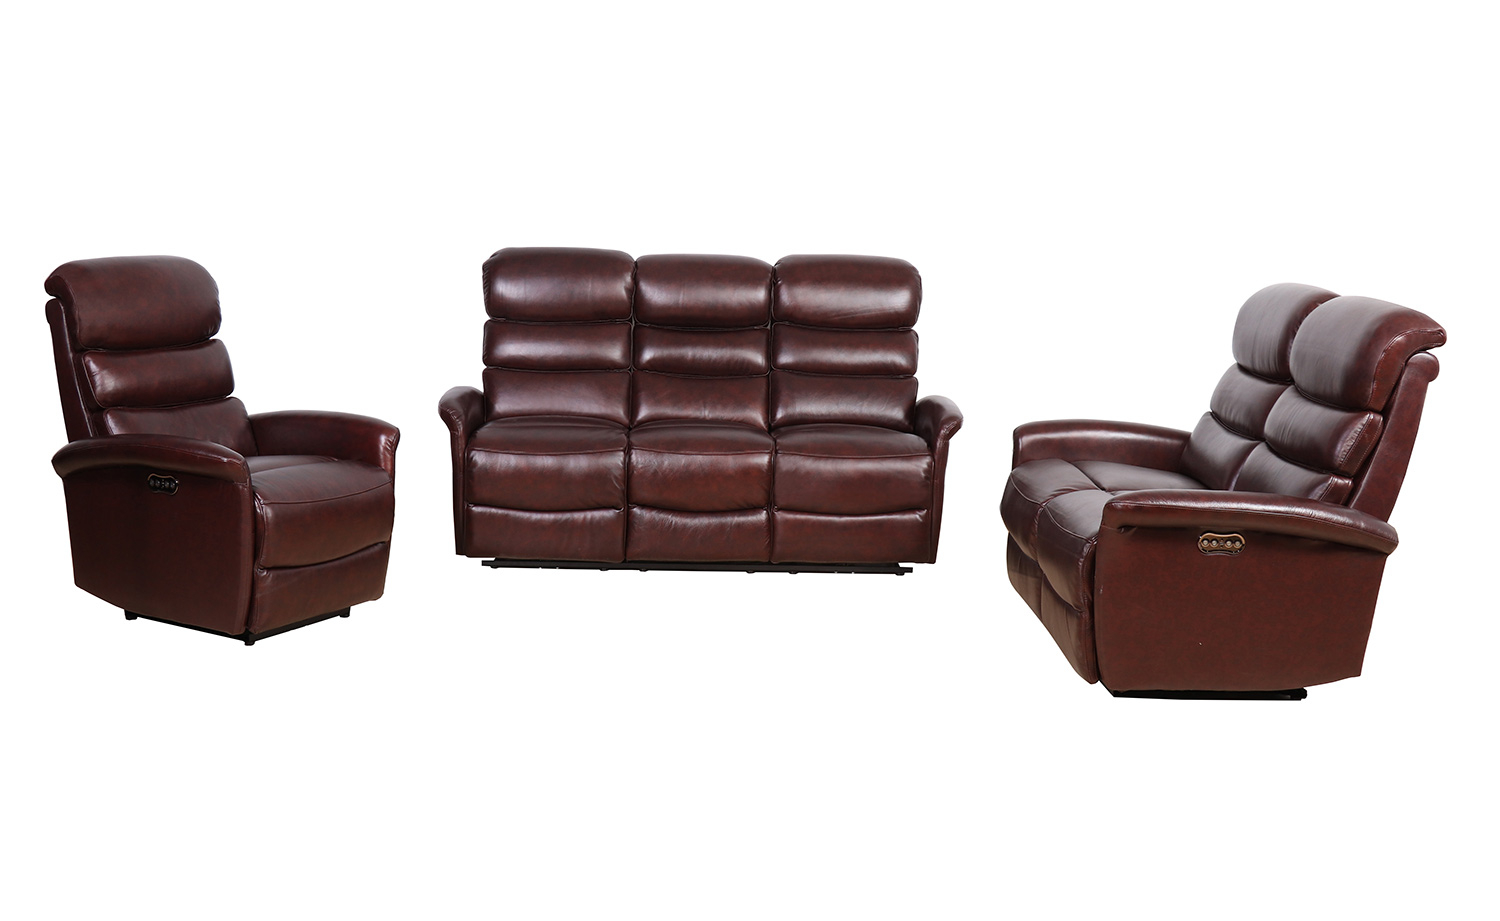 Barcalounger Kelso Power Reclining Sofa Set with Power Head Rests - Ryegate Burgundy/Leather Match